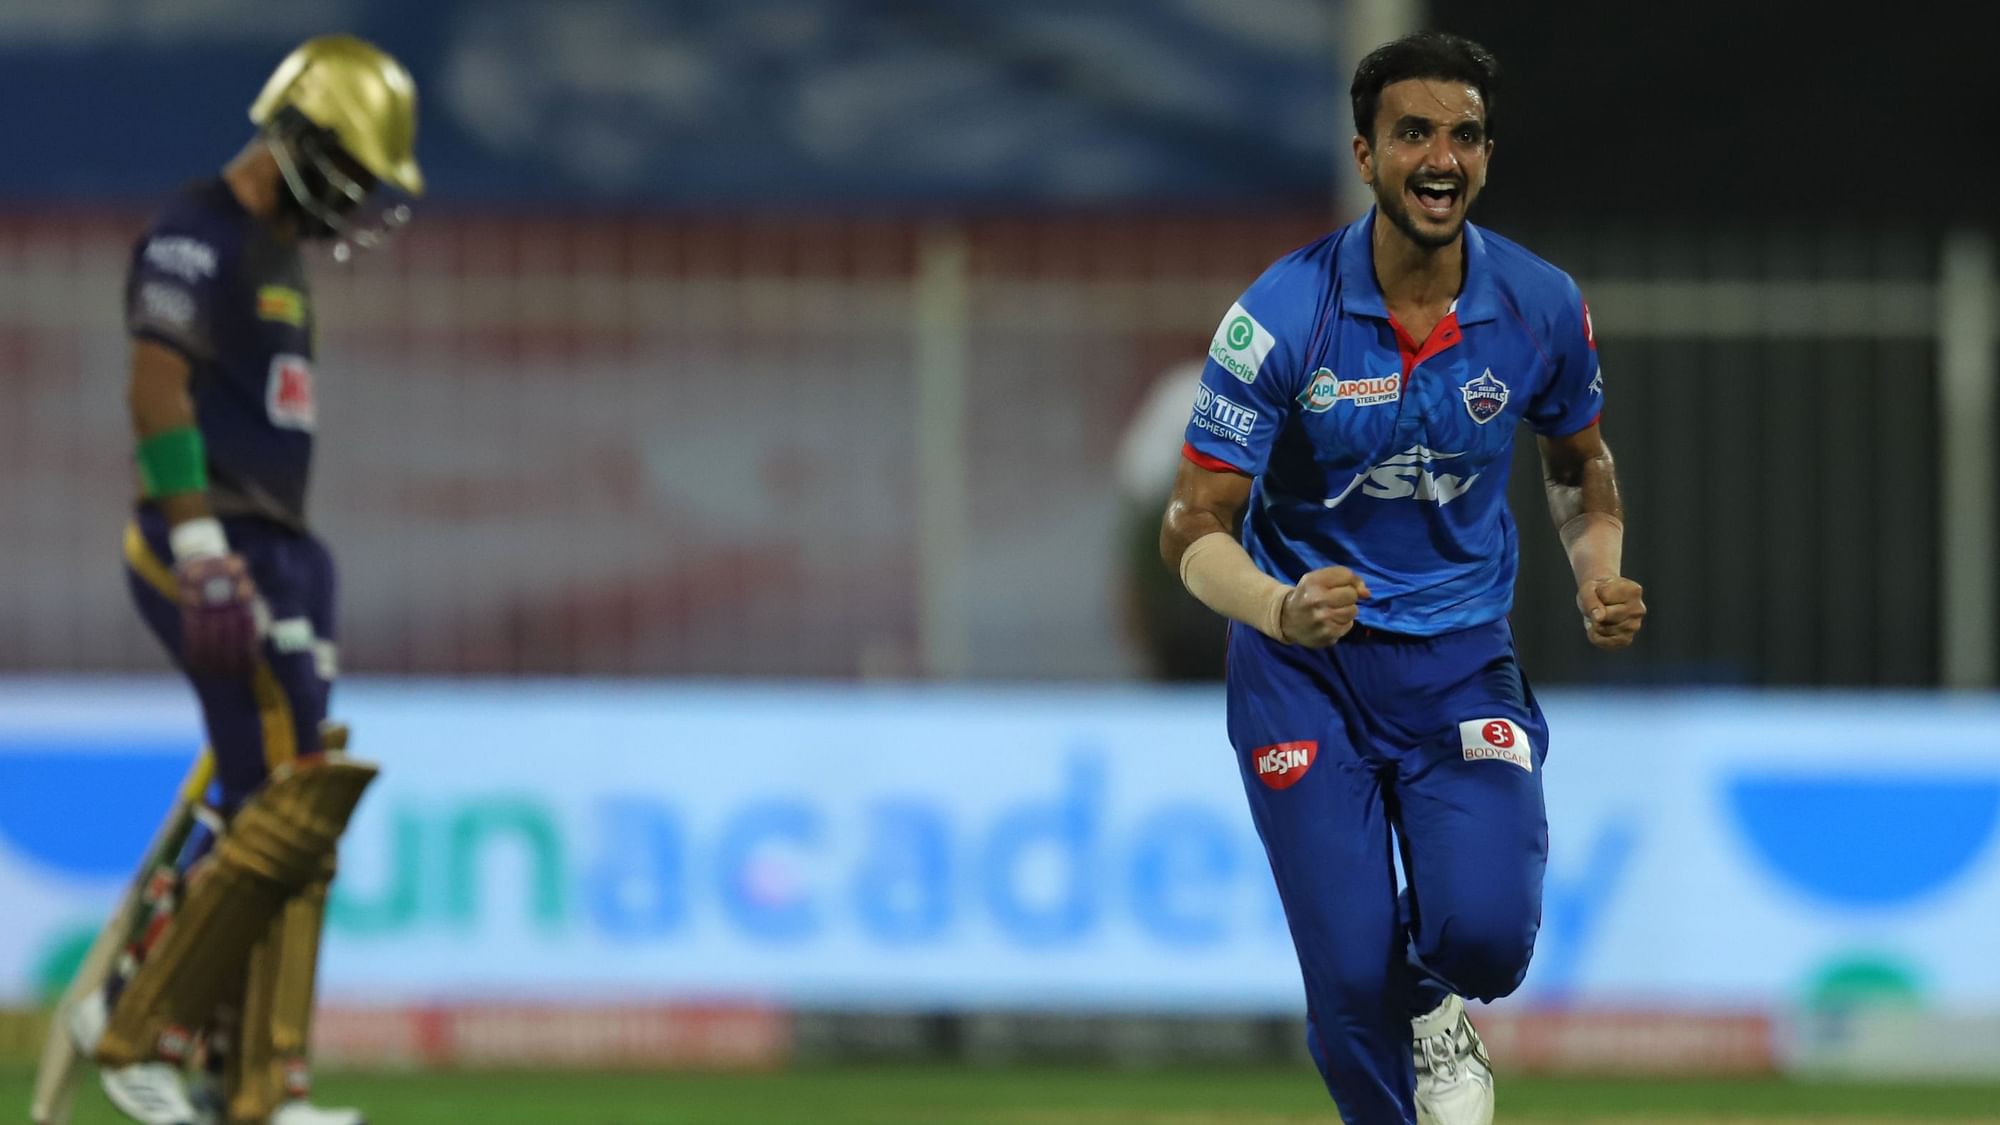 In Delhi Capitals’ previous game in Sharjah, playing his first game, Harshal Patel used his variations very well and took two wickets